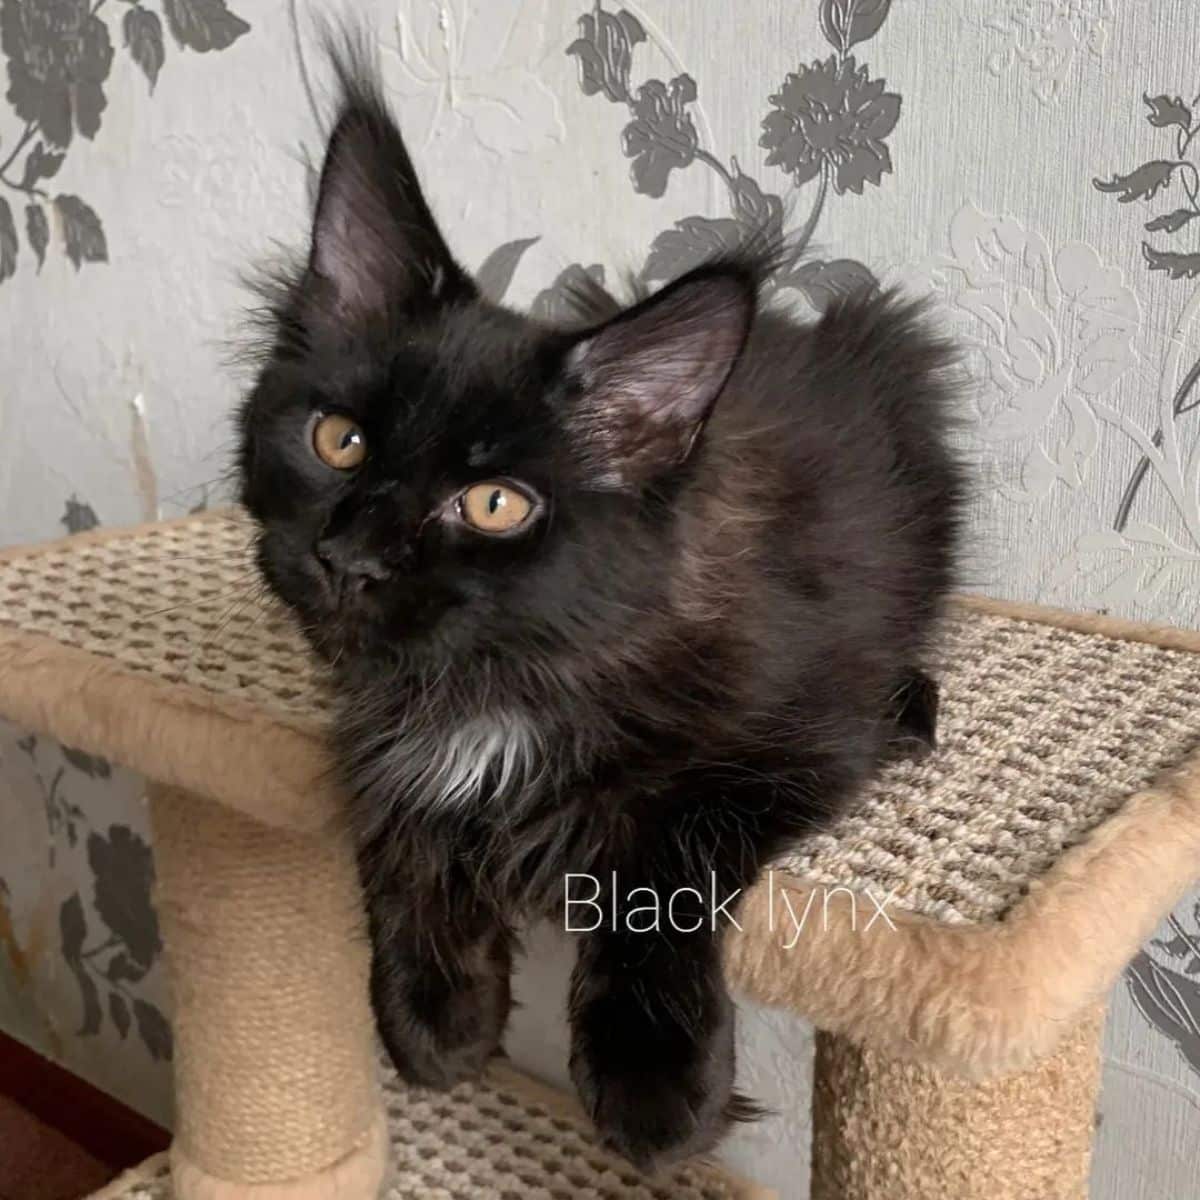 An adorable black maine coon kitten sitting on a cat scratch post.